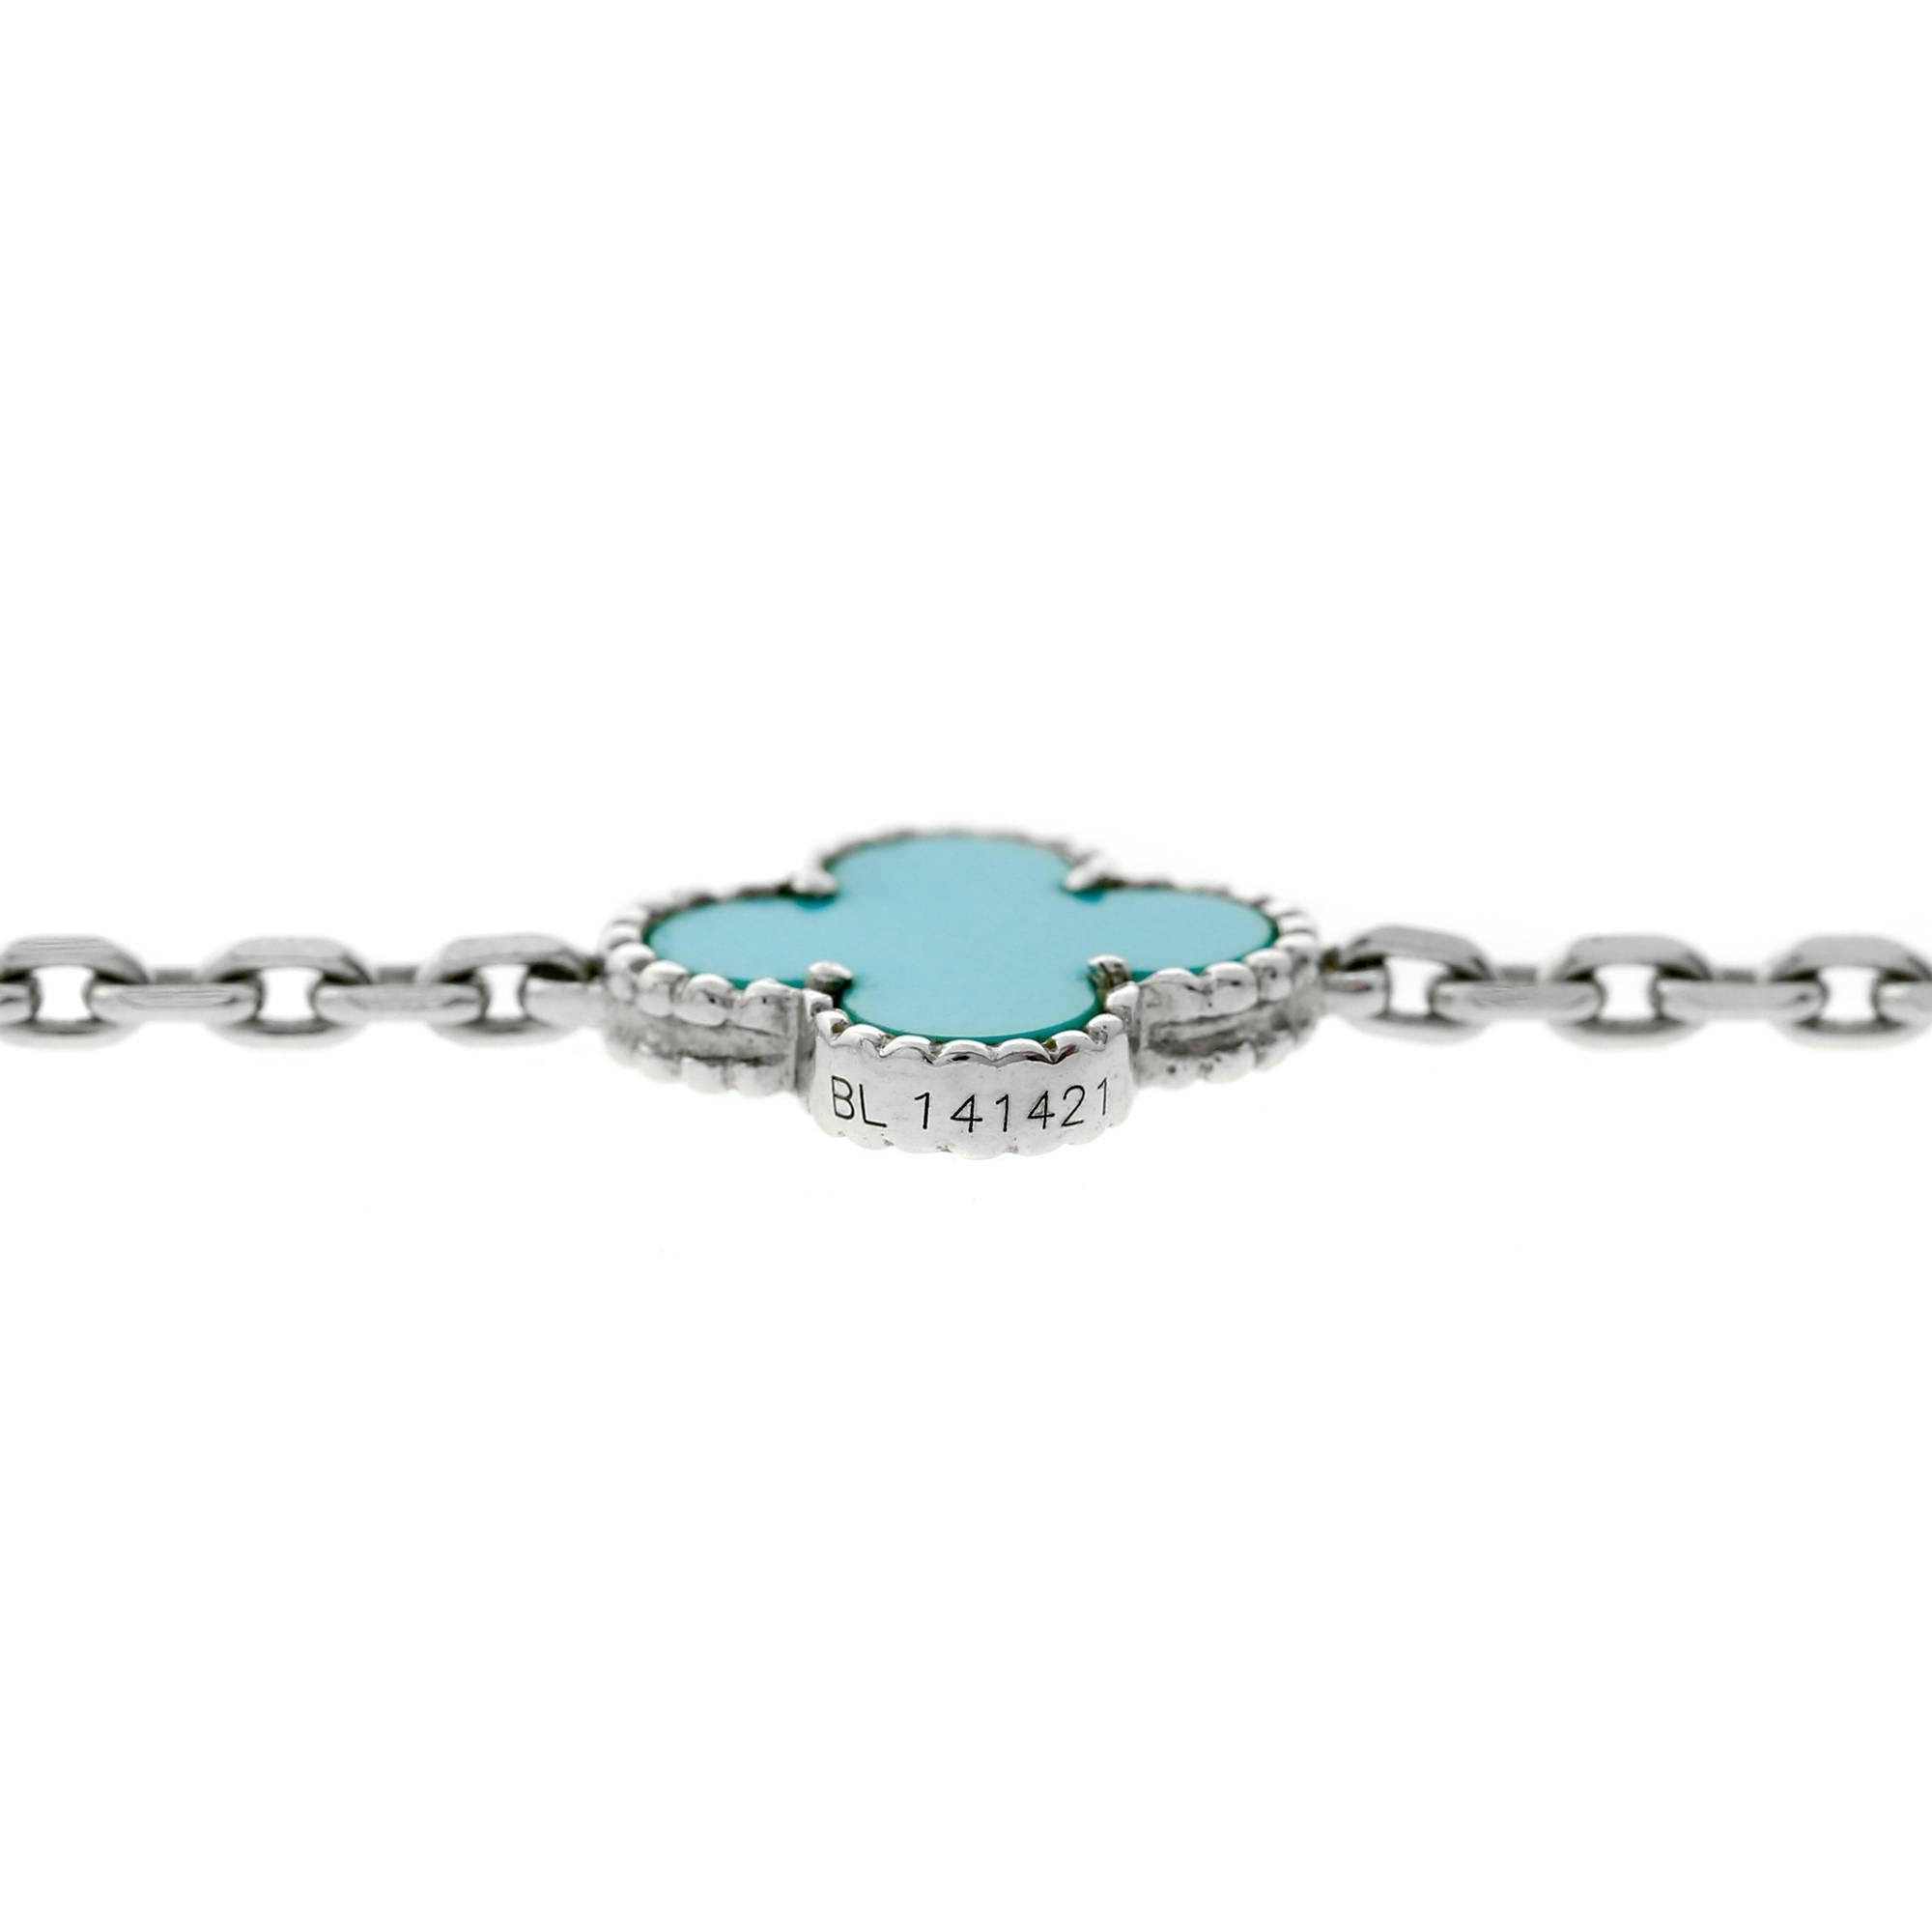 An excellent condition highly collectible Van Cleef Arpels Turquoise Vintage Alhambra Necklace in 18k white gold.

The necklace has a length of 17